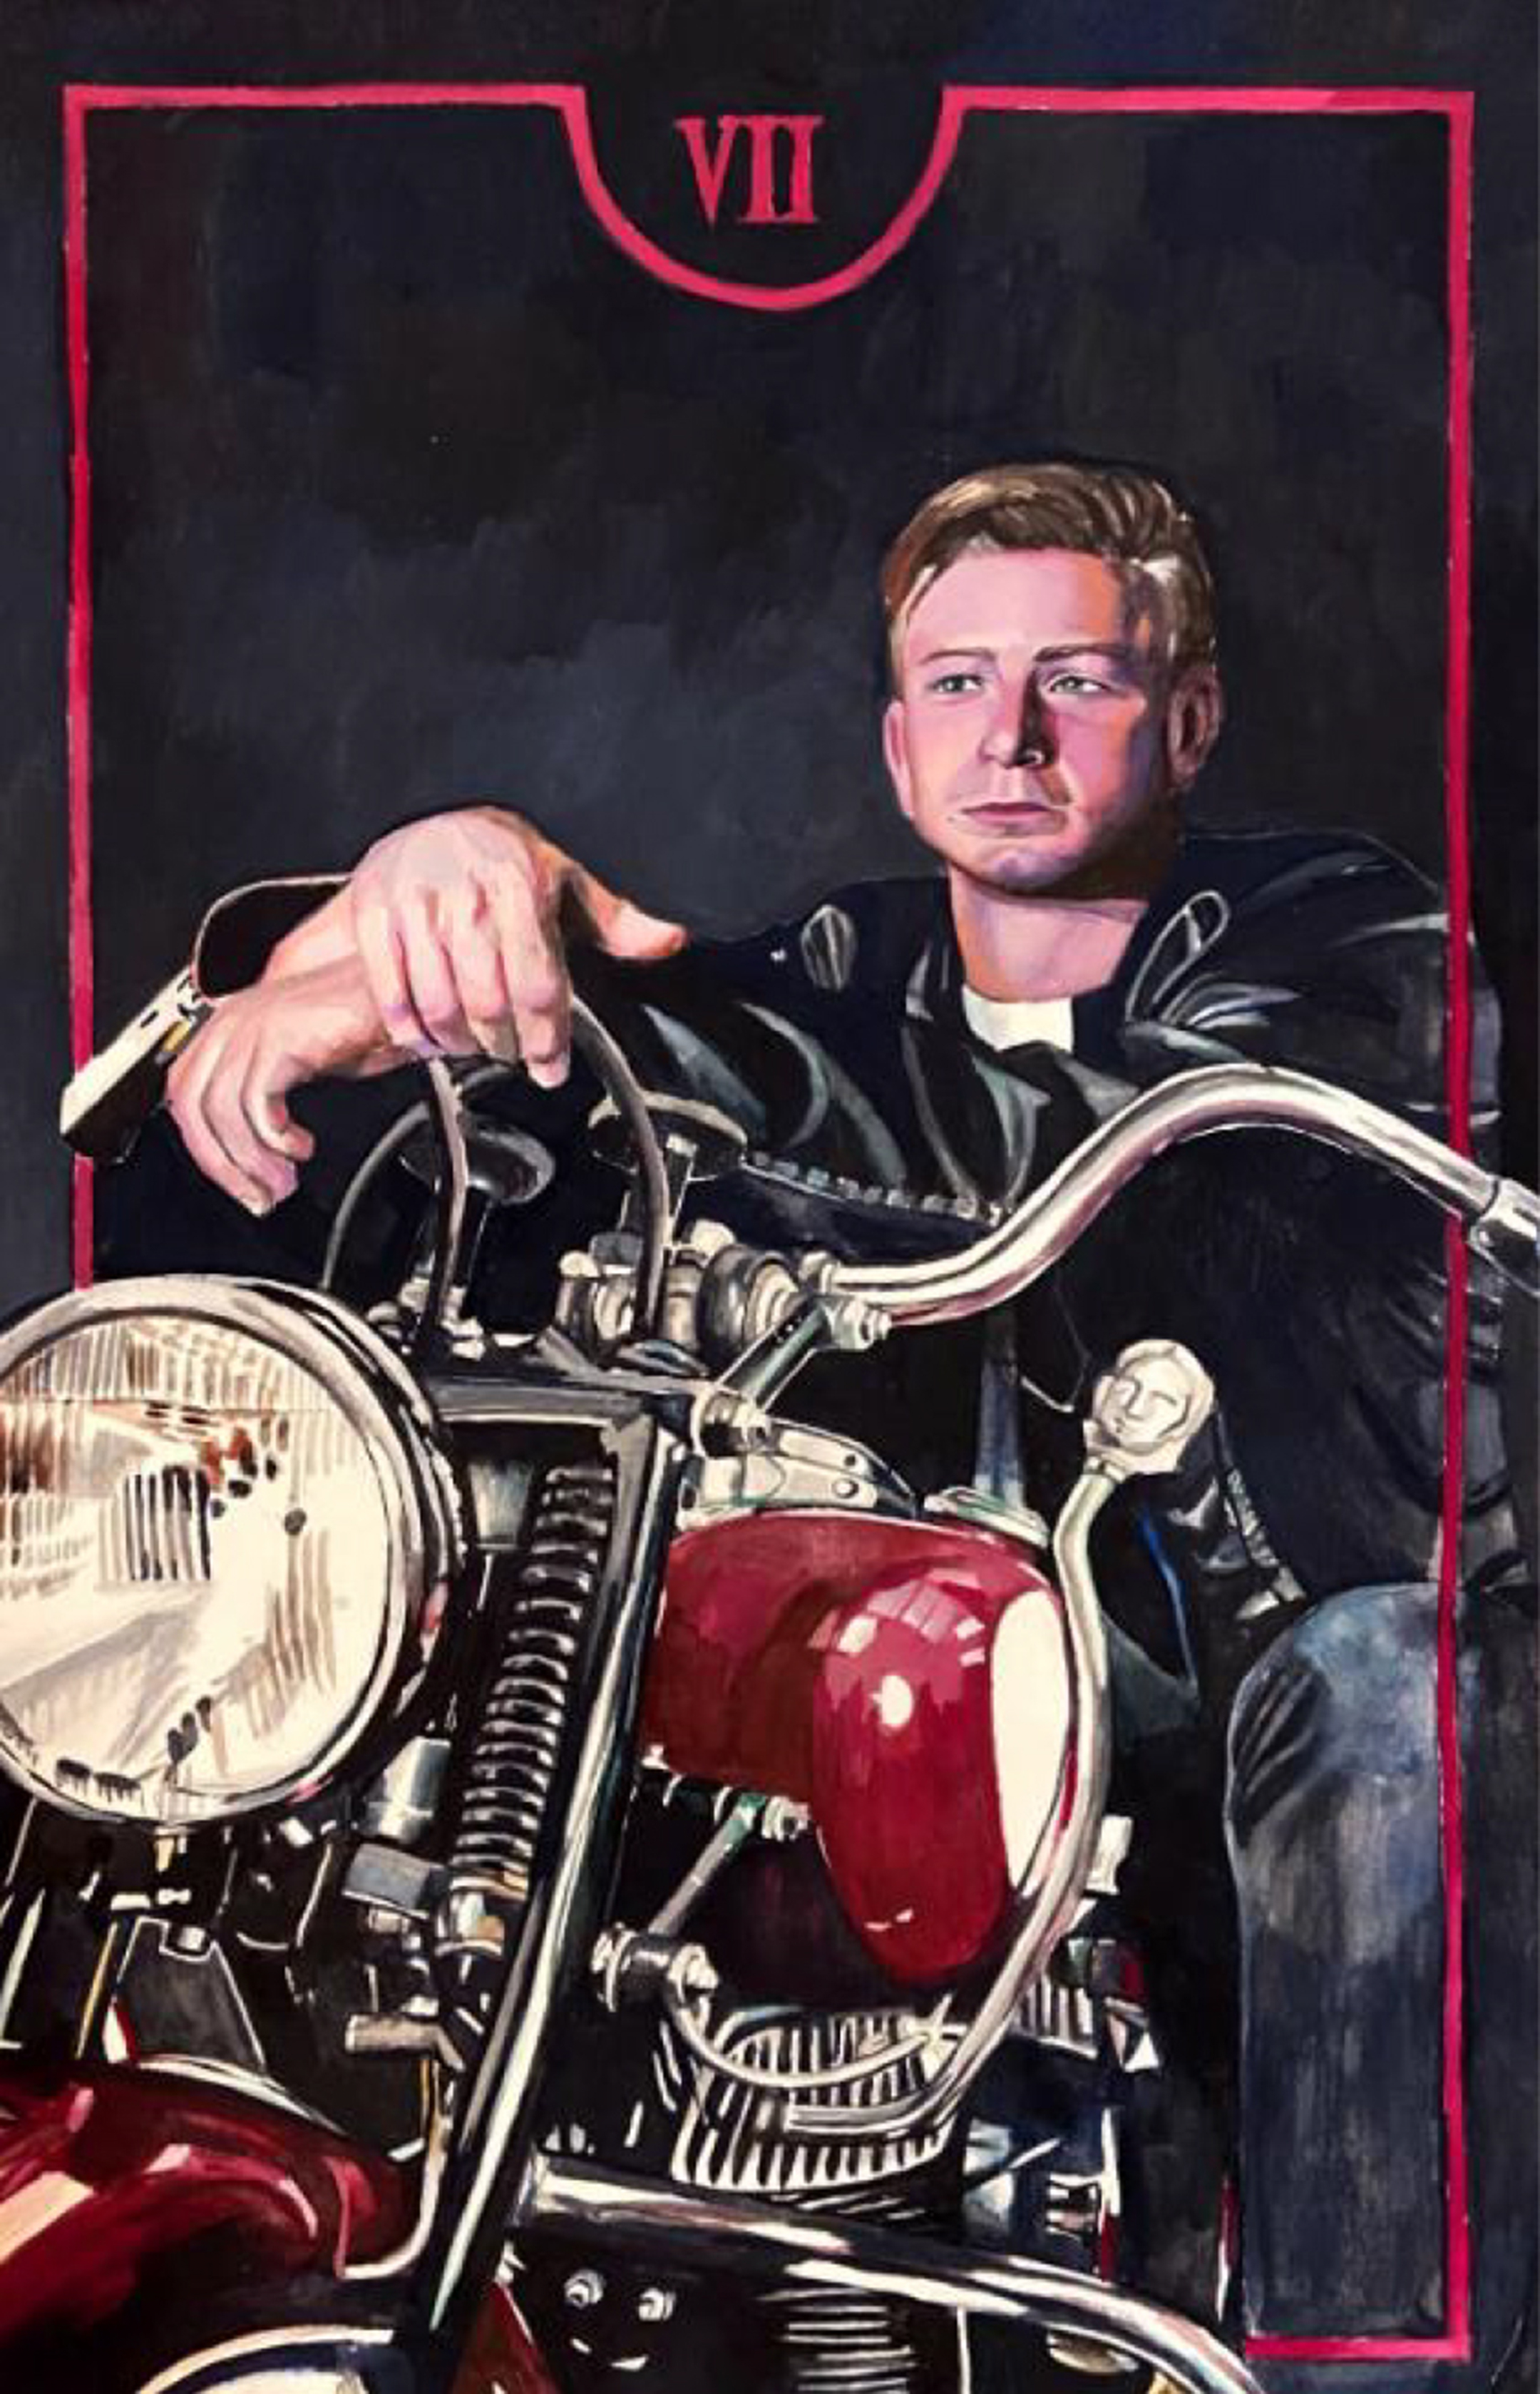 Painting of a young white man in a leather jacket sitting on a motorcycle